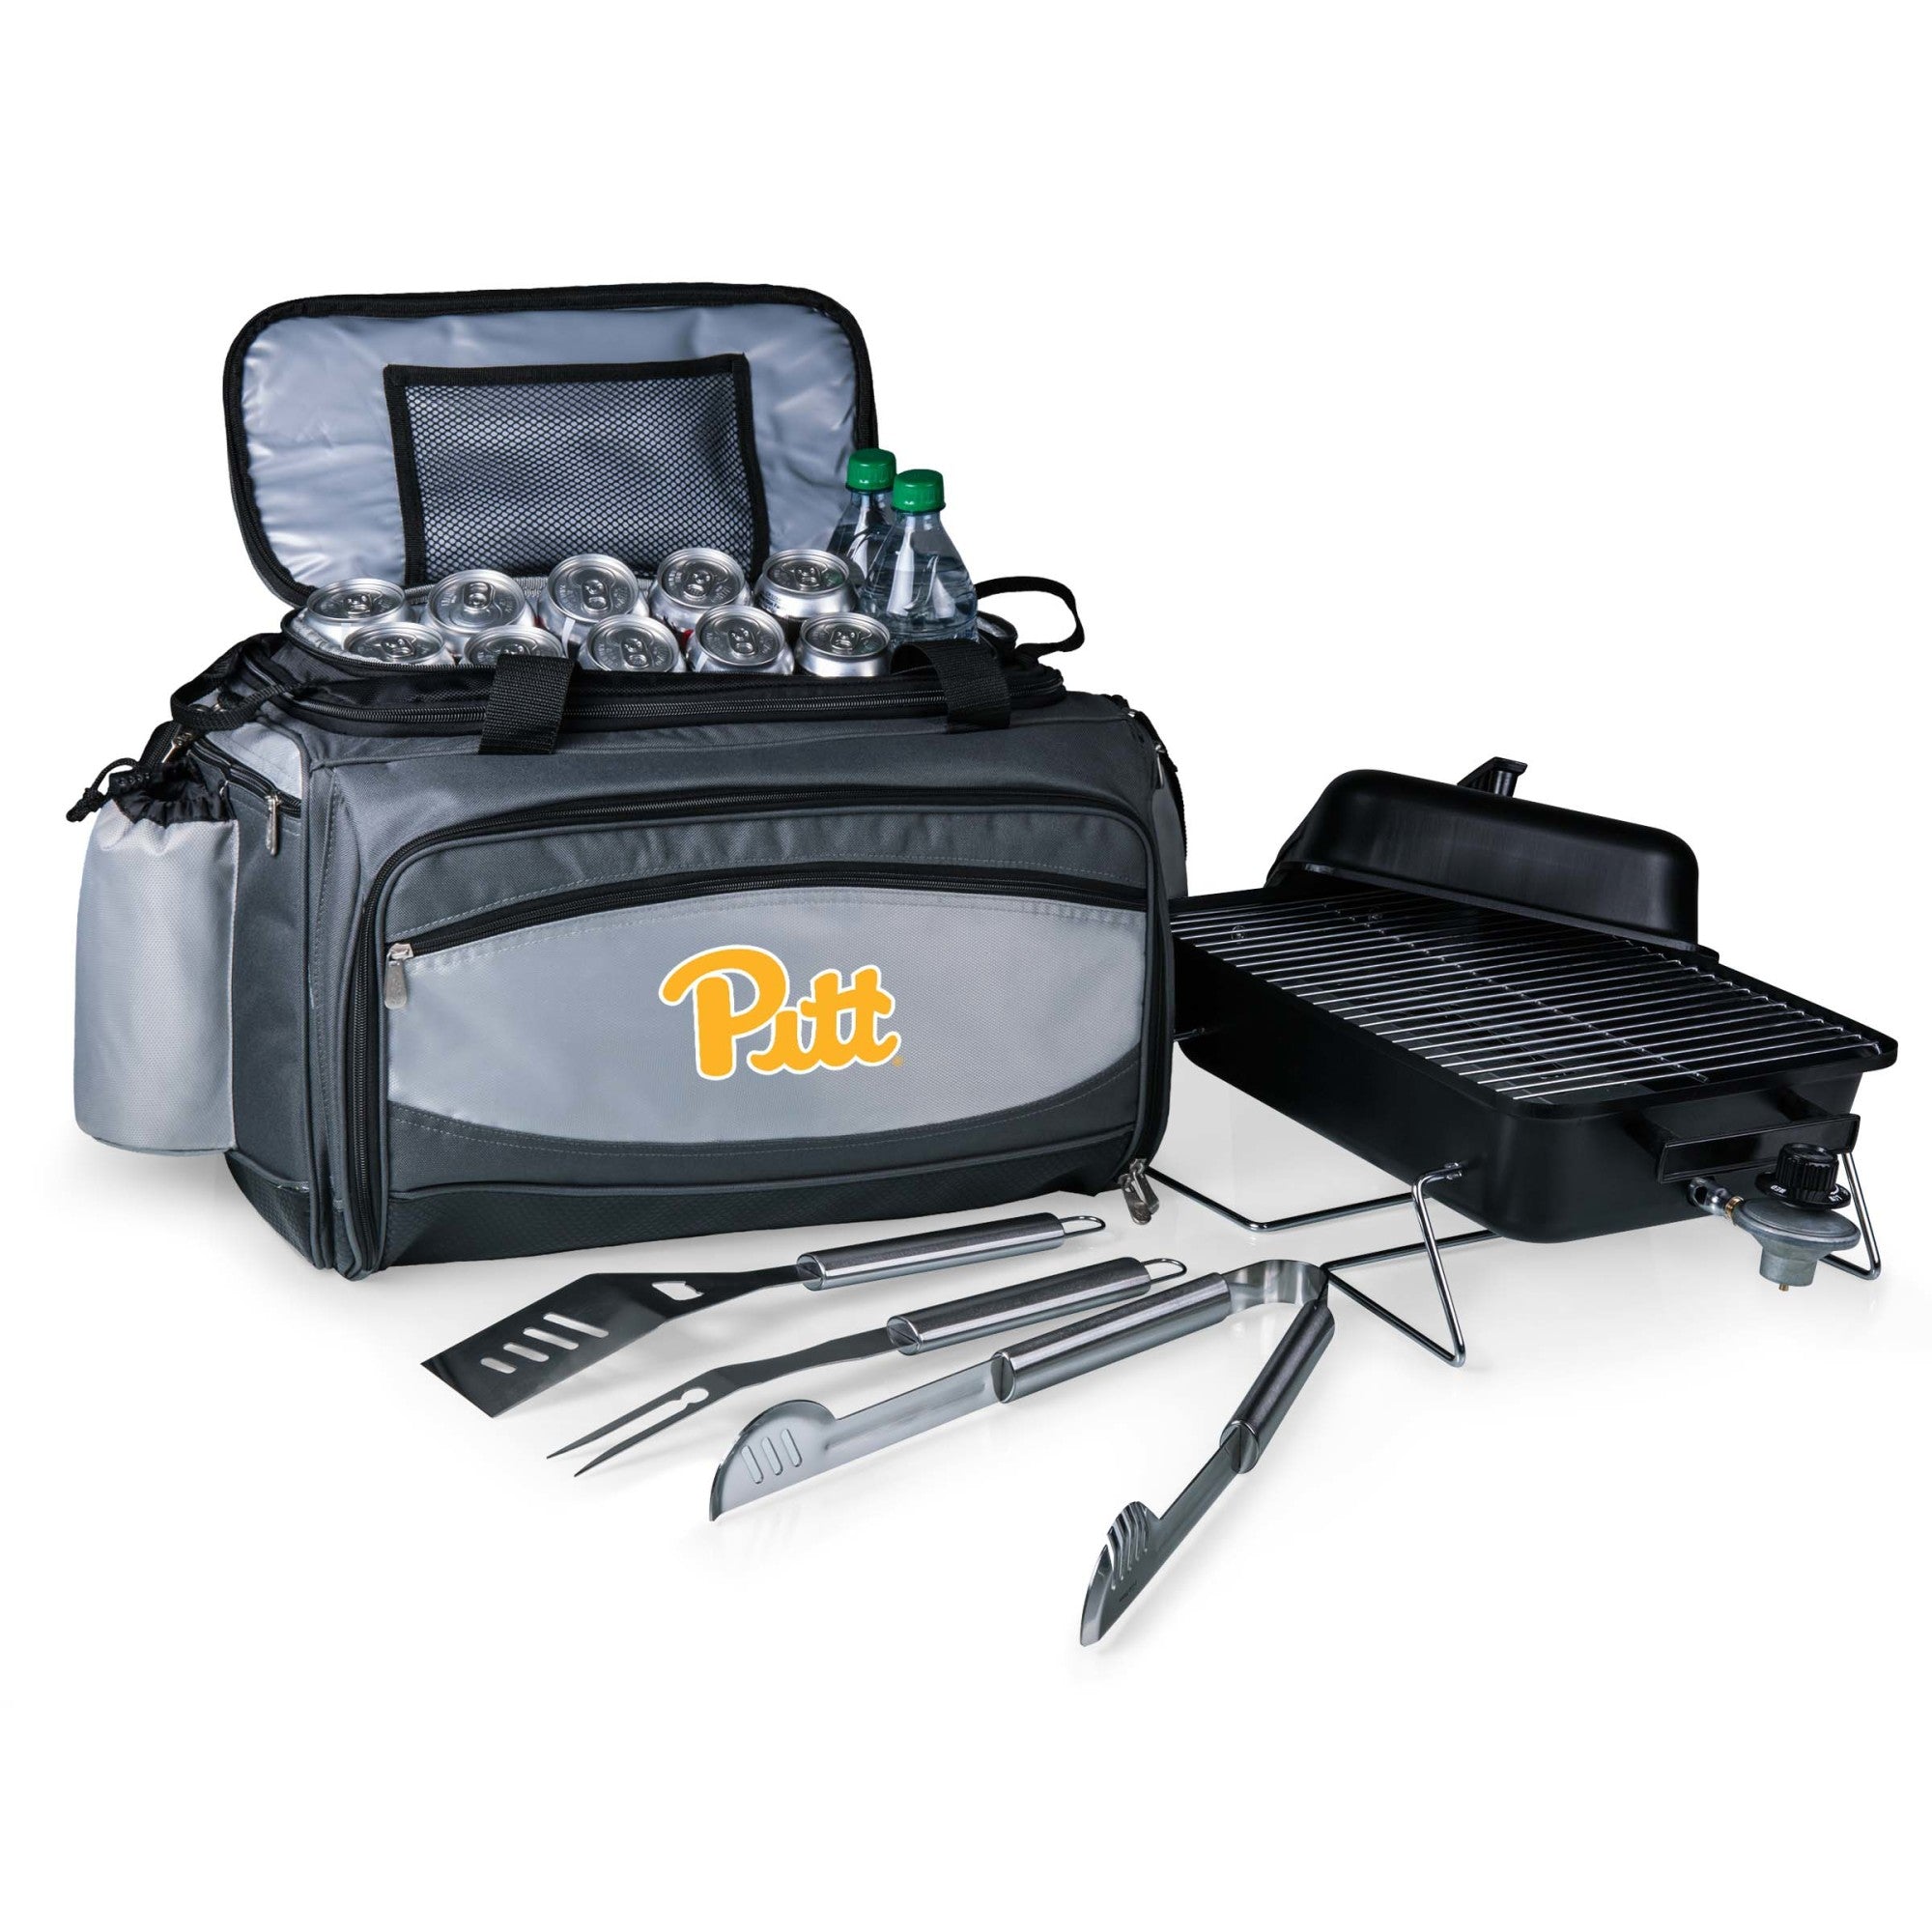 Pittsburgh Panthers - Vulcan Portable Propane Grill & Cooler Tote